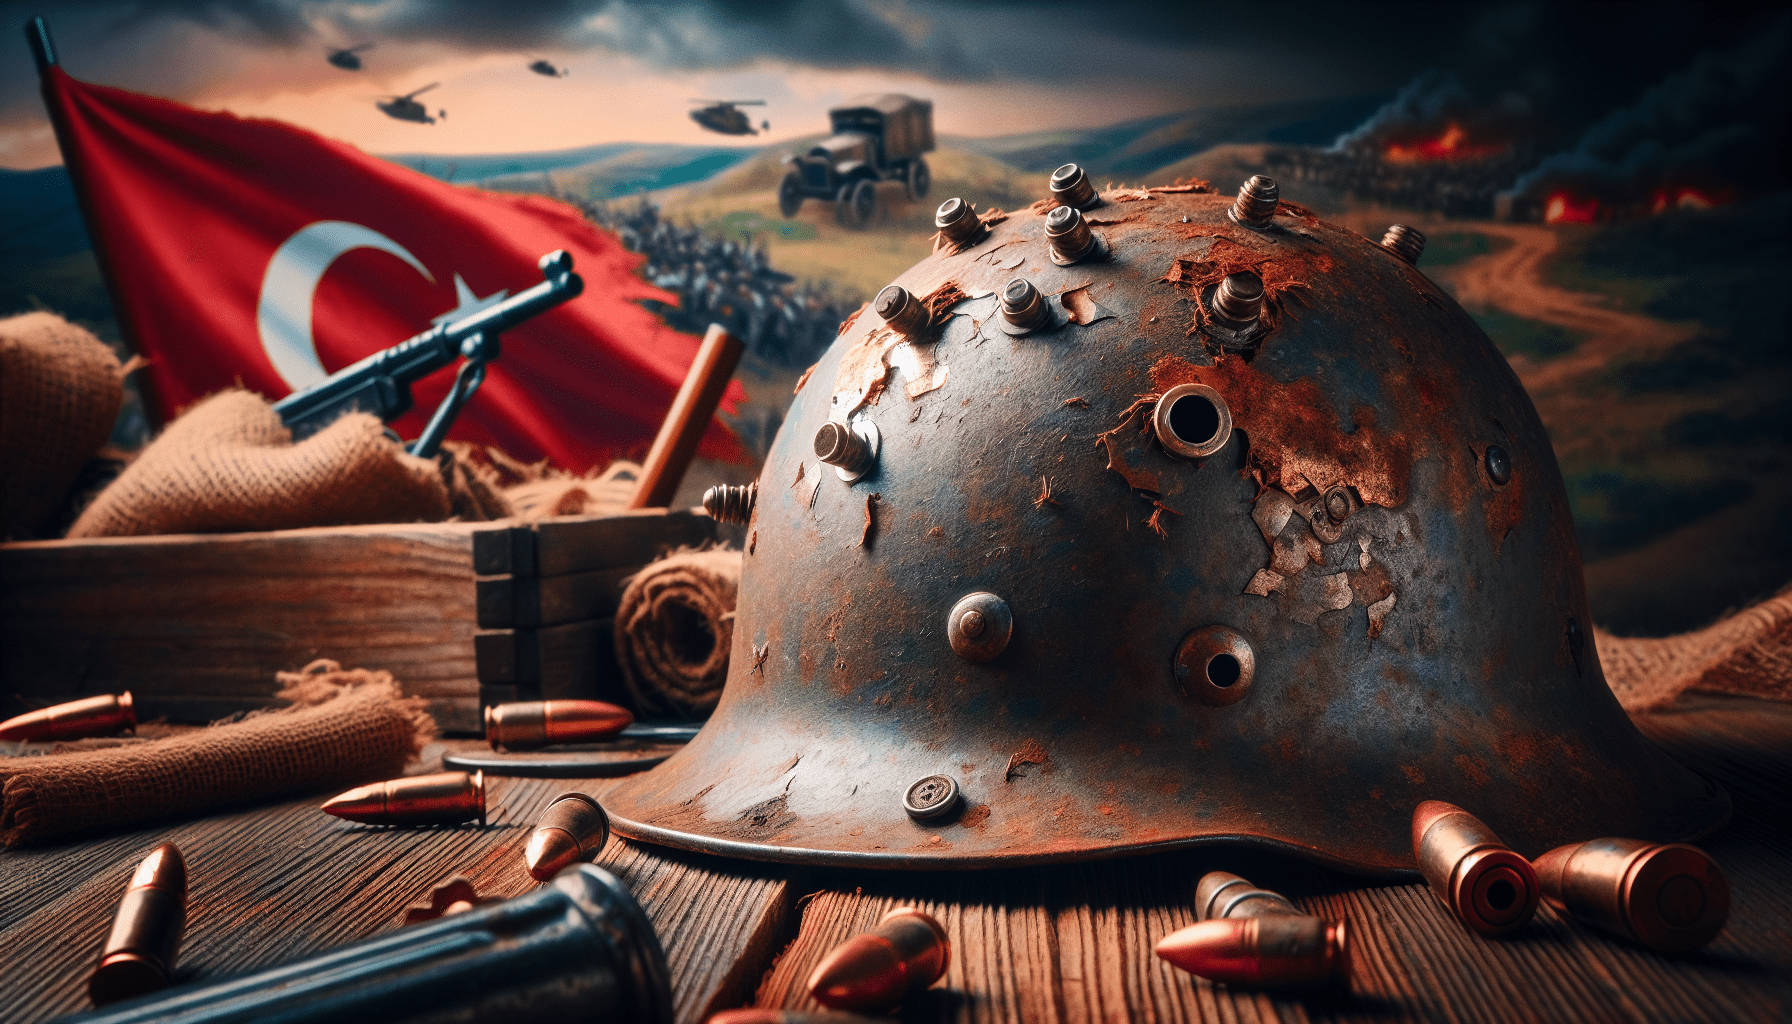 A rusty, battle-scarred helmet with several bullet holes surrounded by bullets and a gun, in front of a Turkish flag, depicting a historical battle scene with explosions and helicopters in the background.